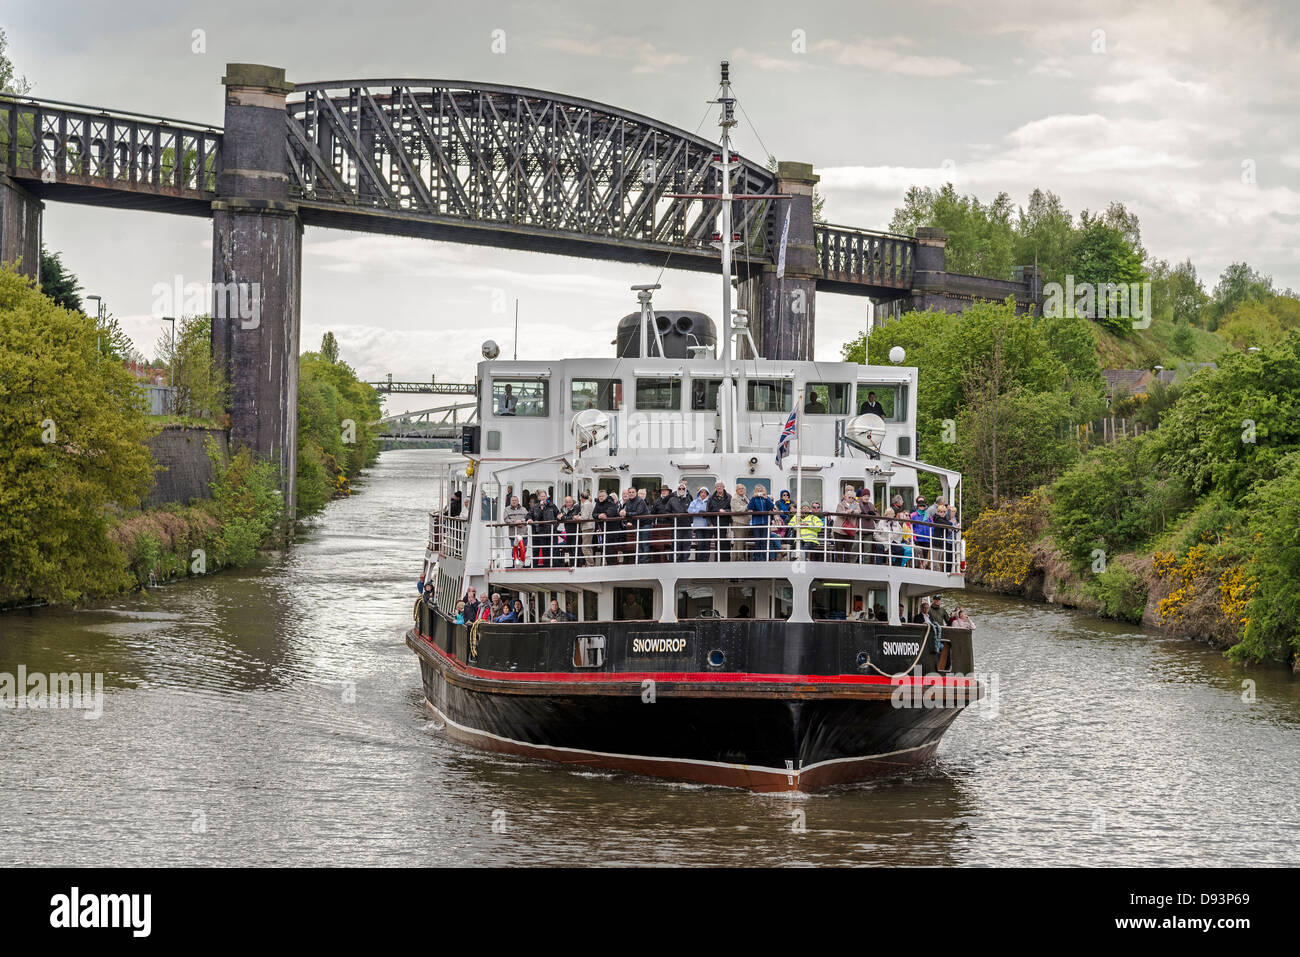 Mersey ferry Snowdrop at Latchford locks on the Manchester ship canal cruise. Stock Photo